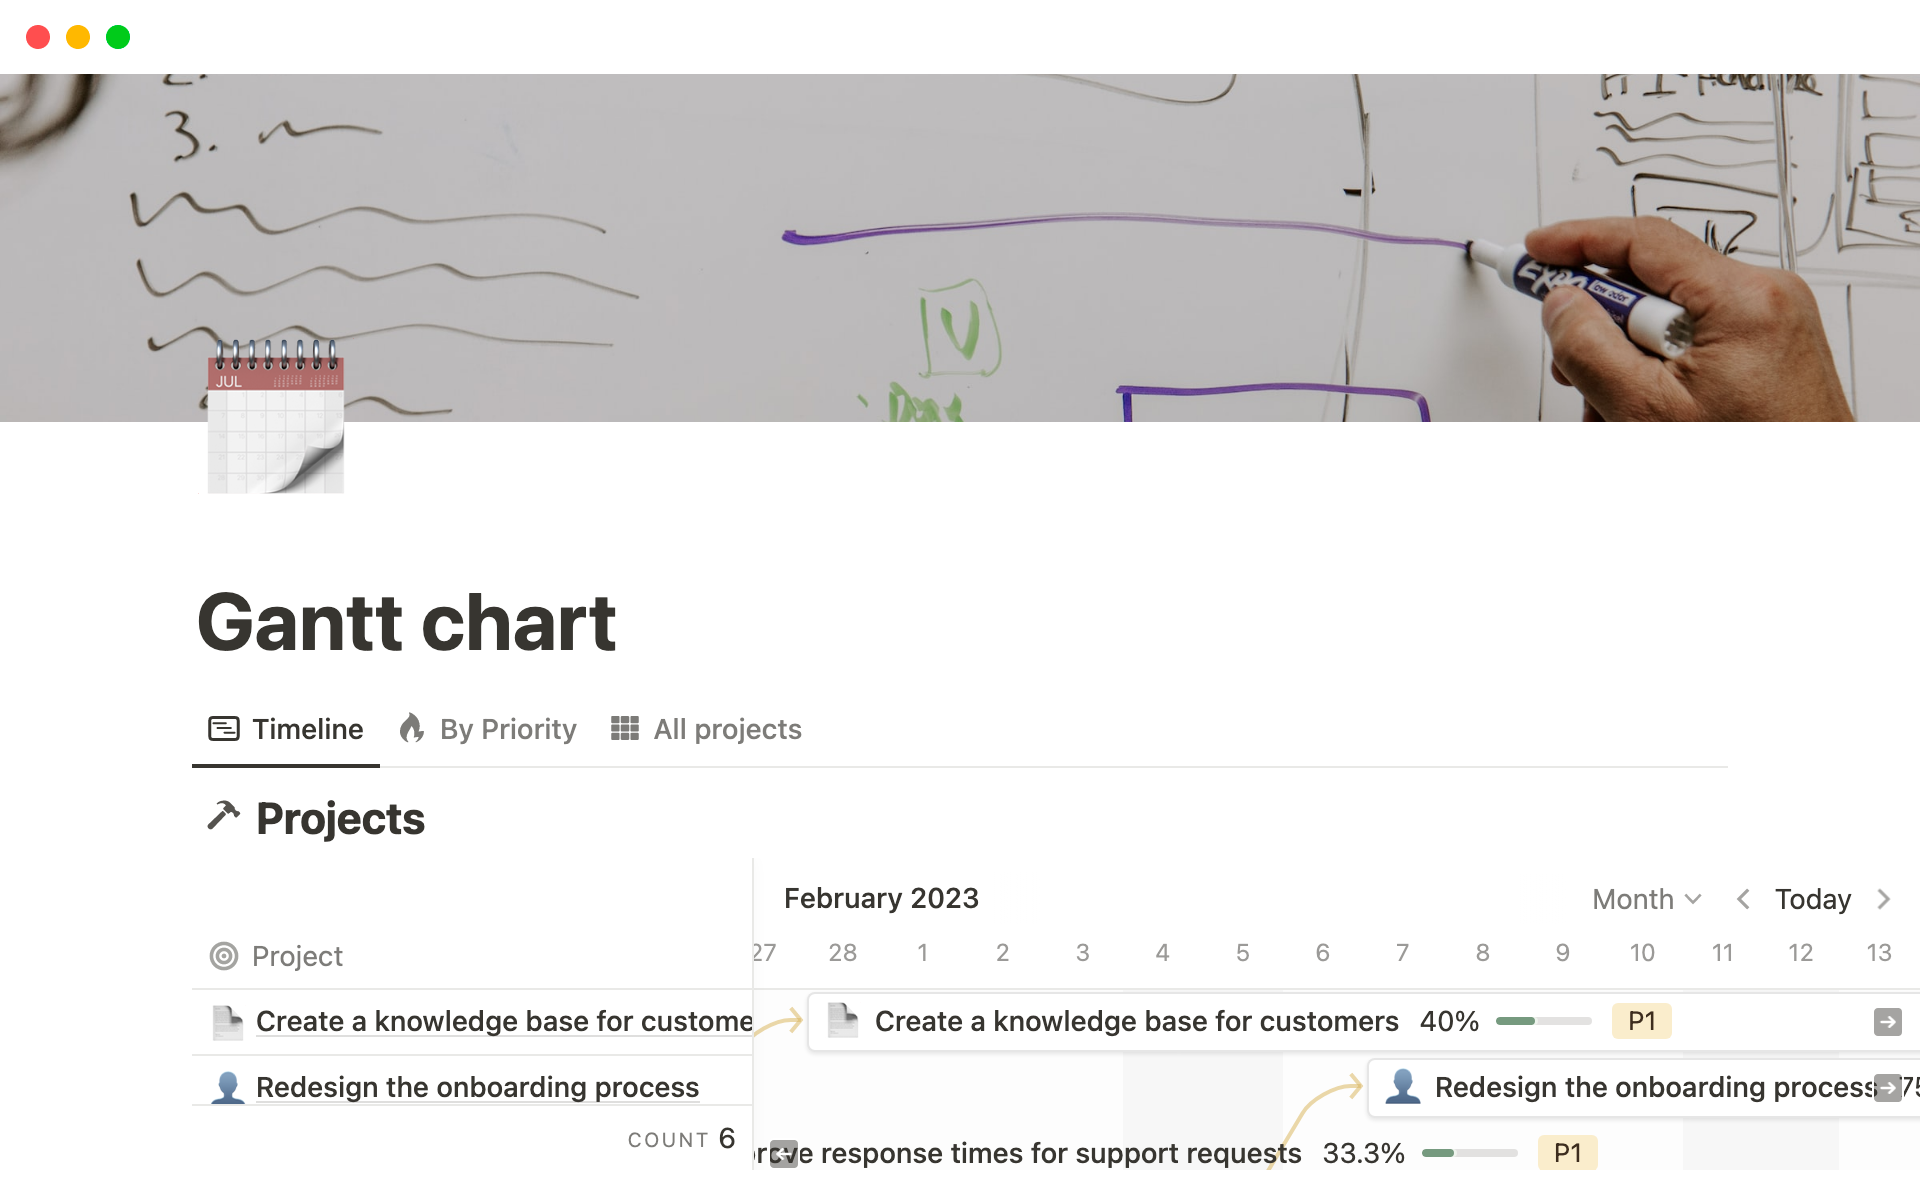 Gantt charts are the easiest, most powerful way to view projects in a timeline, identifying smaller sub-projects or tasks, and their sequencing and dependencies.